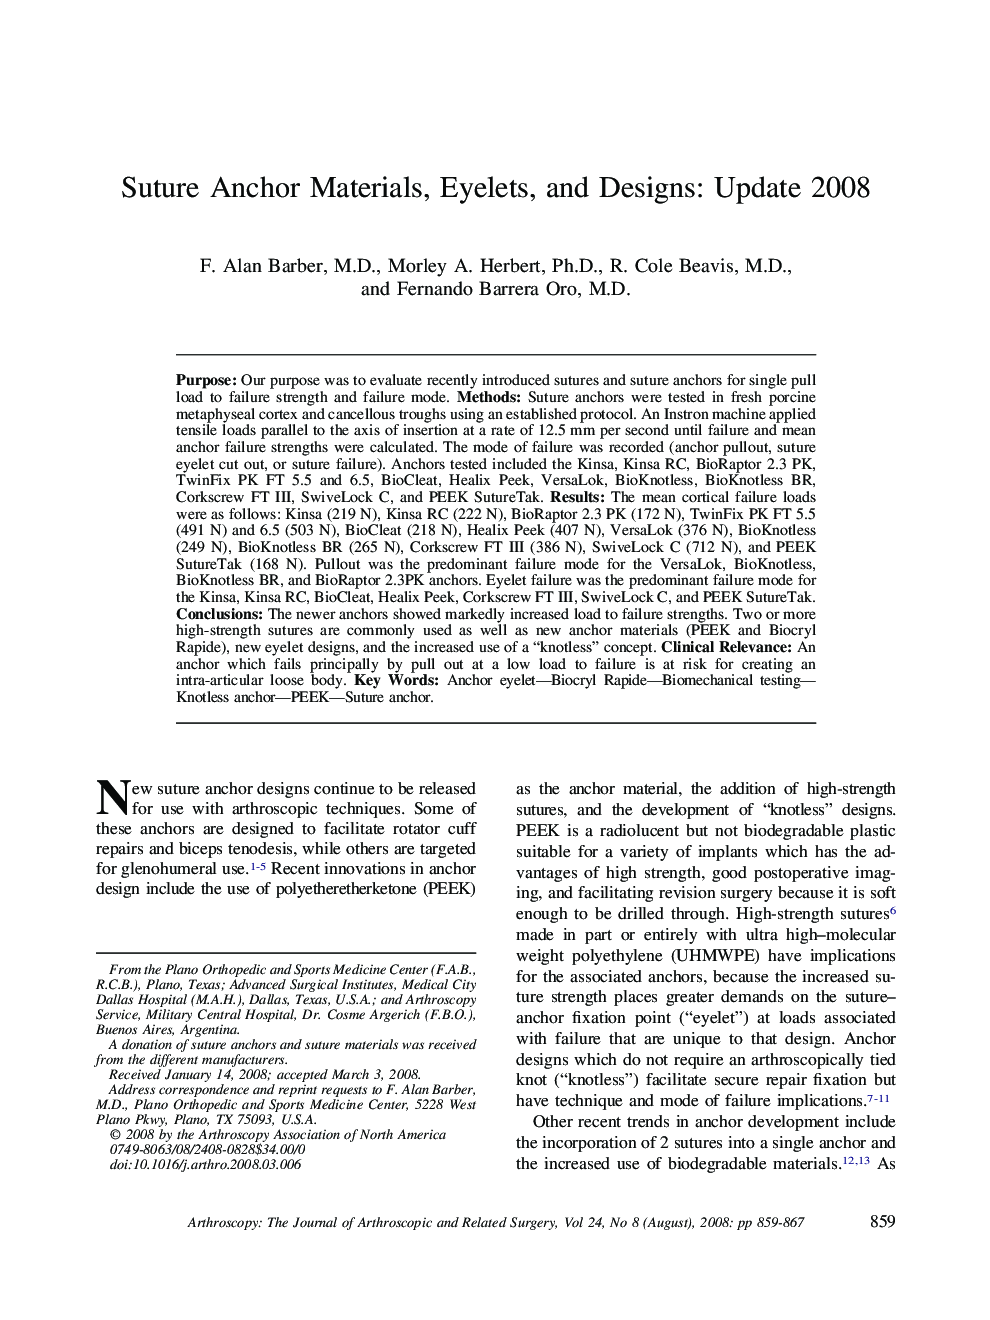 Suture Anchor Materials, Eyelets, and Designs: Update 2008 